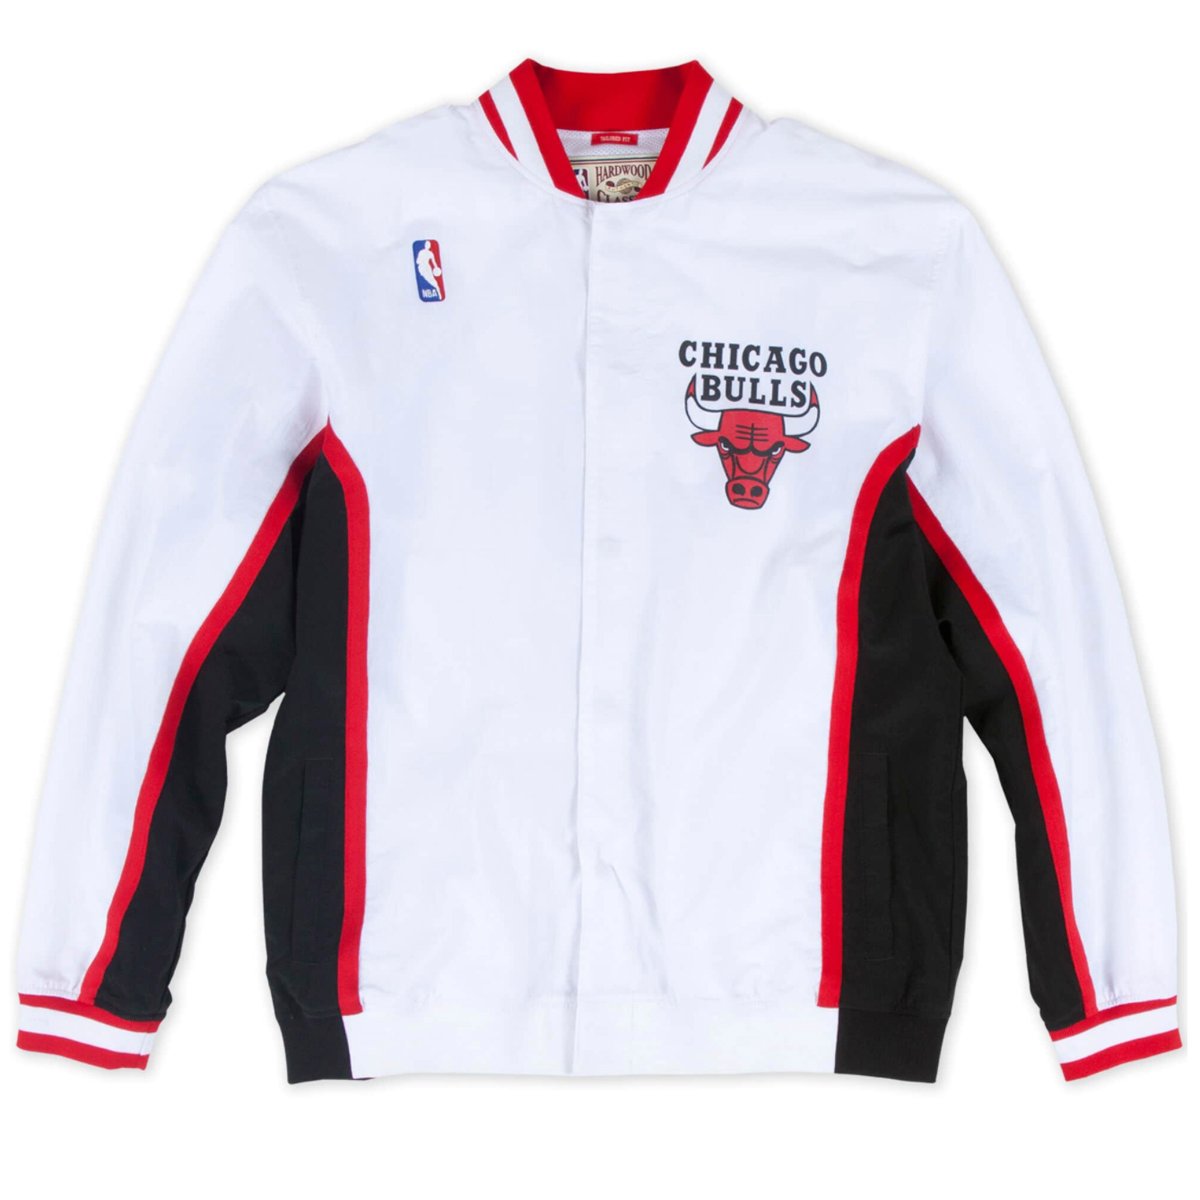 Image of Mitchell And Ness NBA Chicago Bulls Authentic Warm Up Jacket 1992-93, White